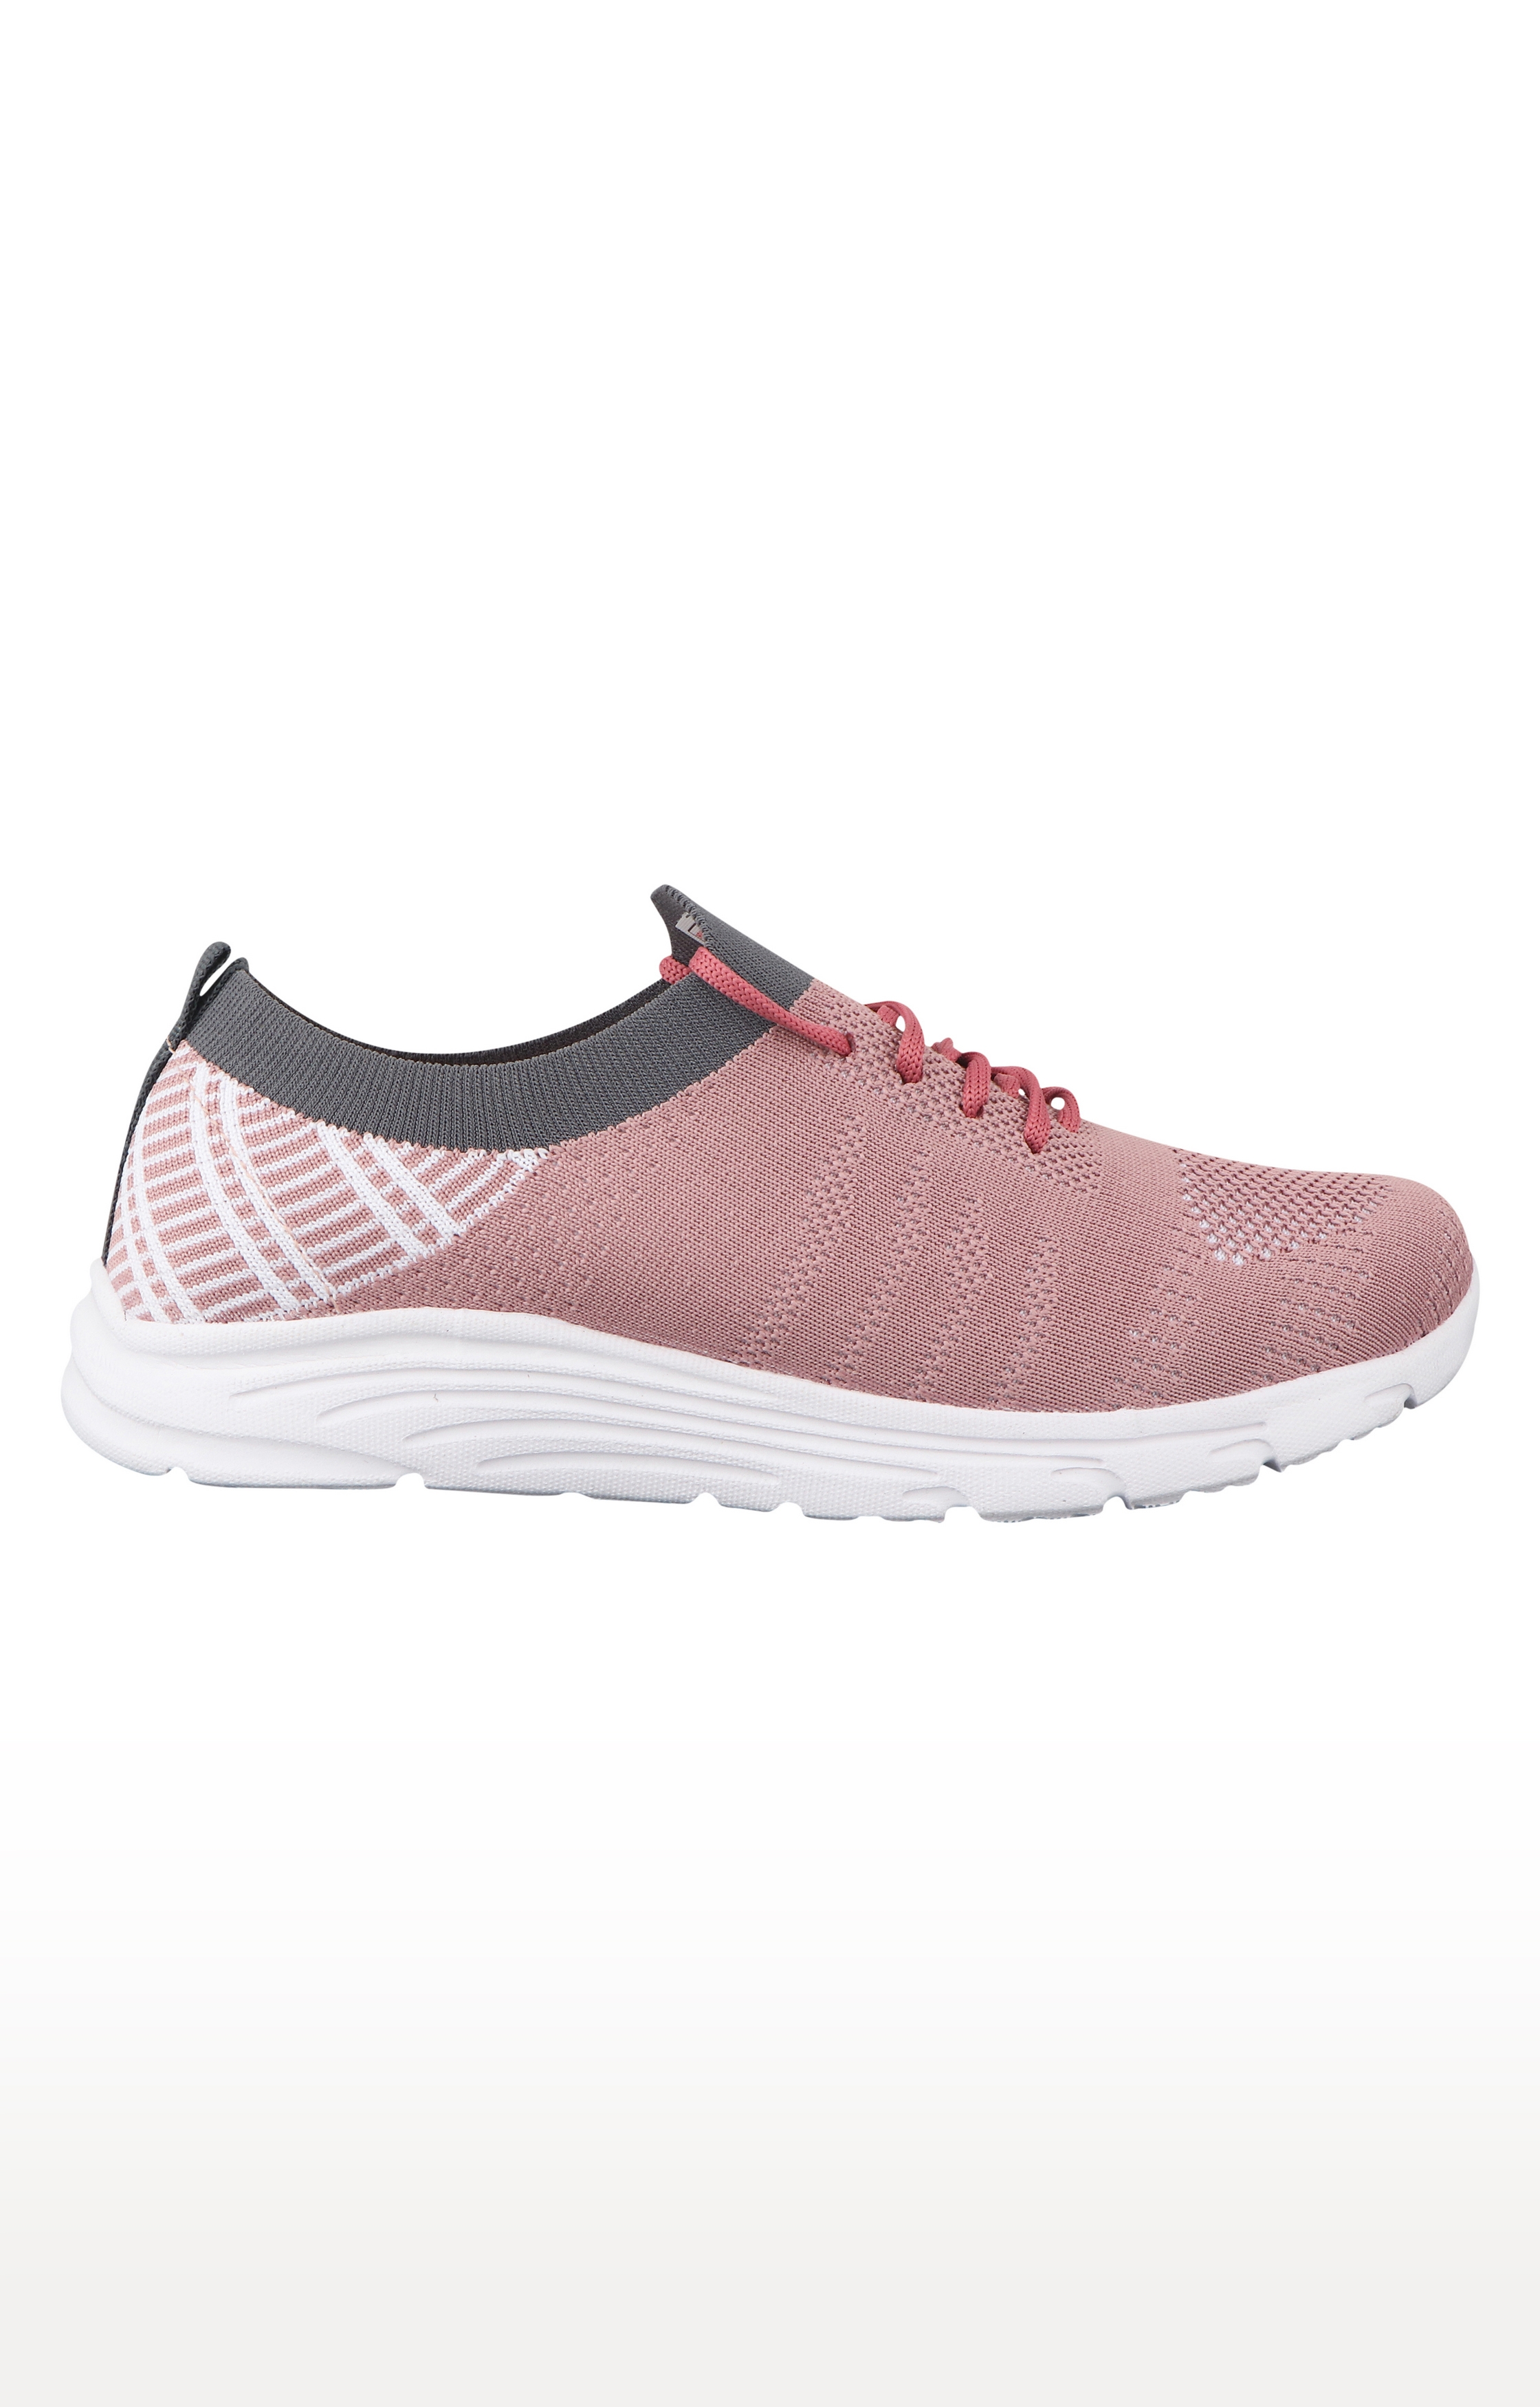 Onion Pink Running Shoes (MELODY_02_ONI)